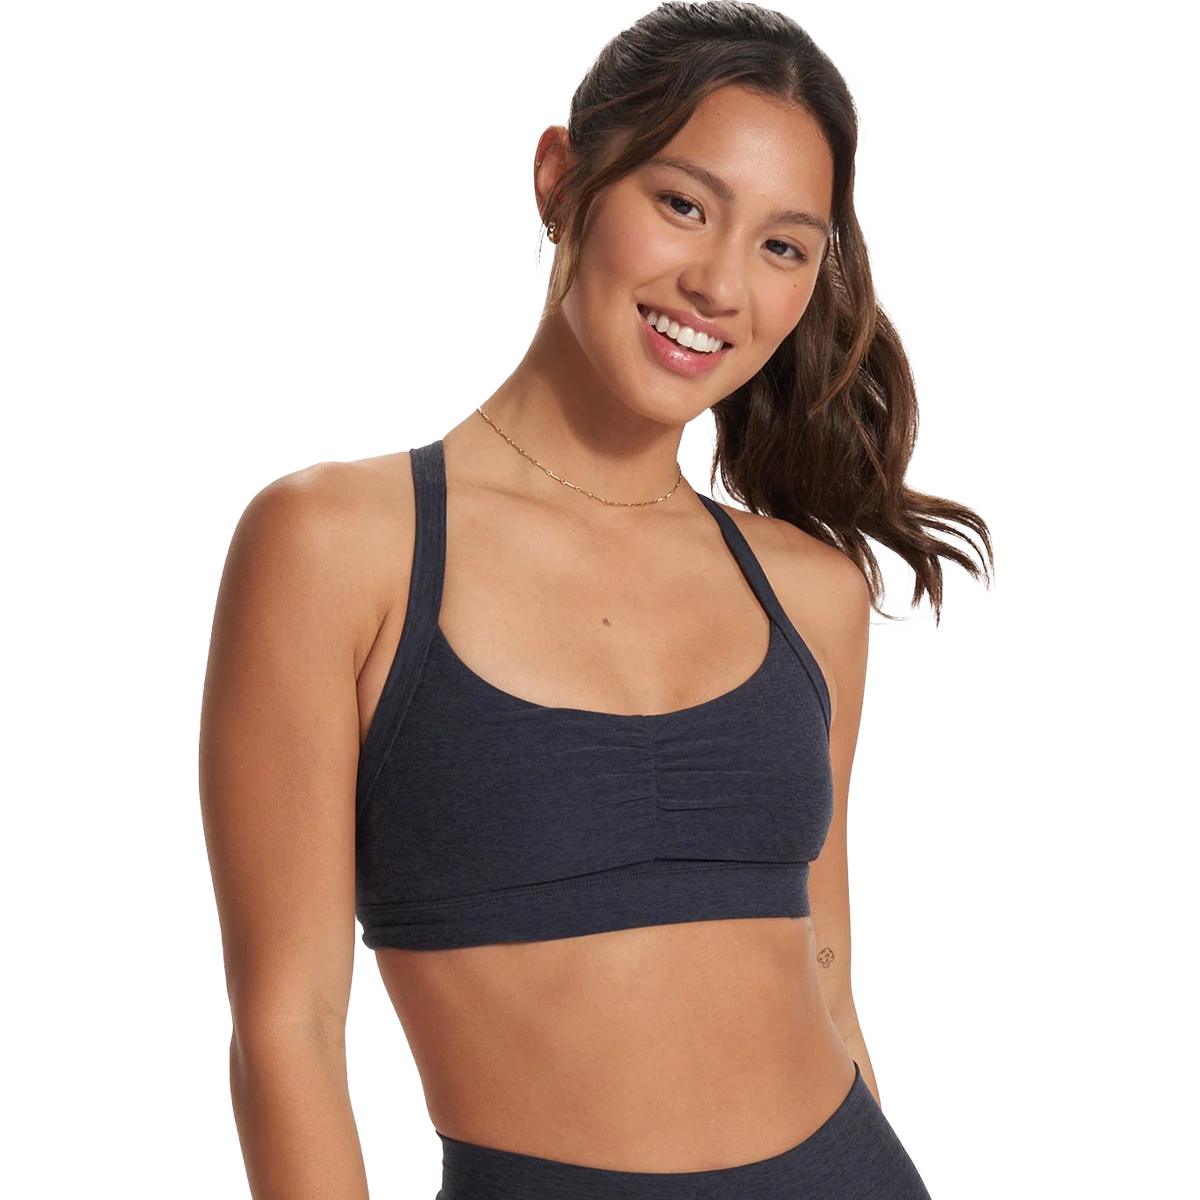 The North Face Women's Elevation Sports Bra